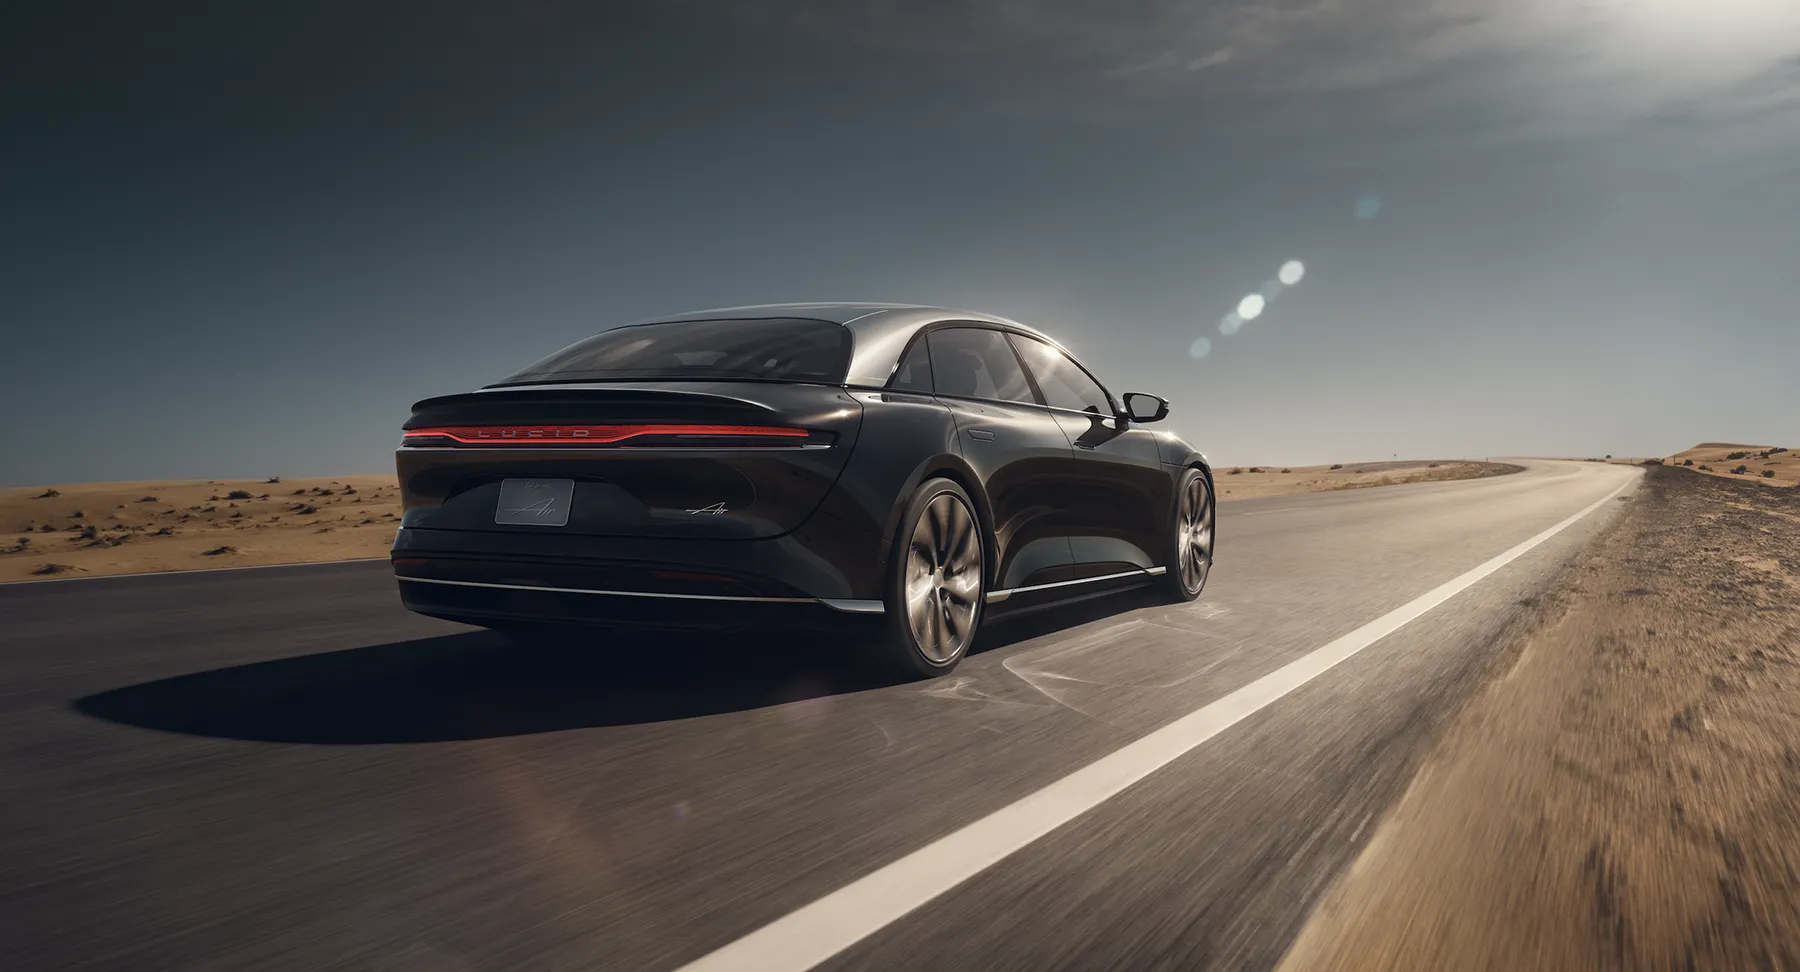 Lucid Air achieves an estimated EPA range of 517 miles on a single charge